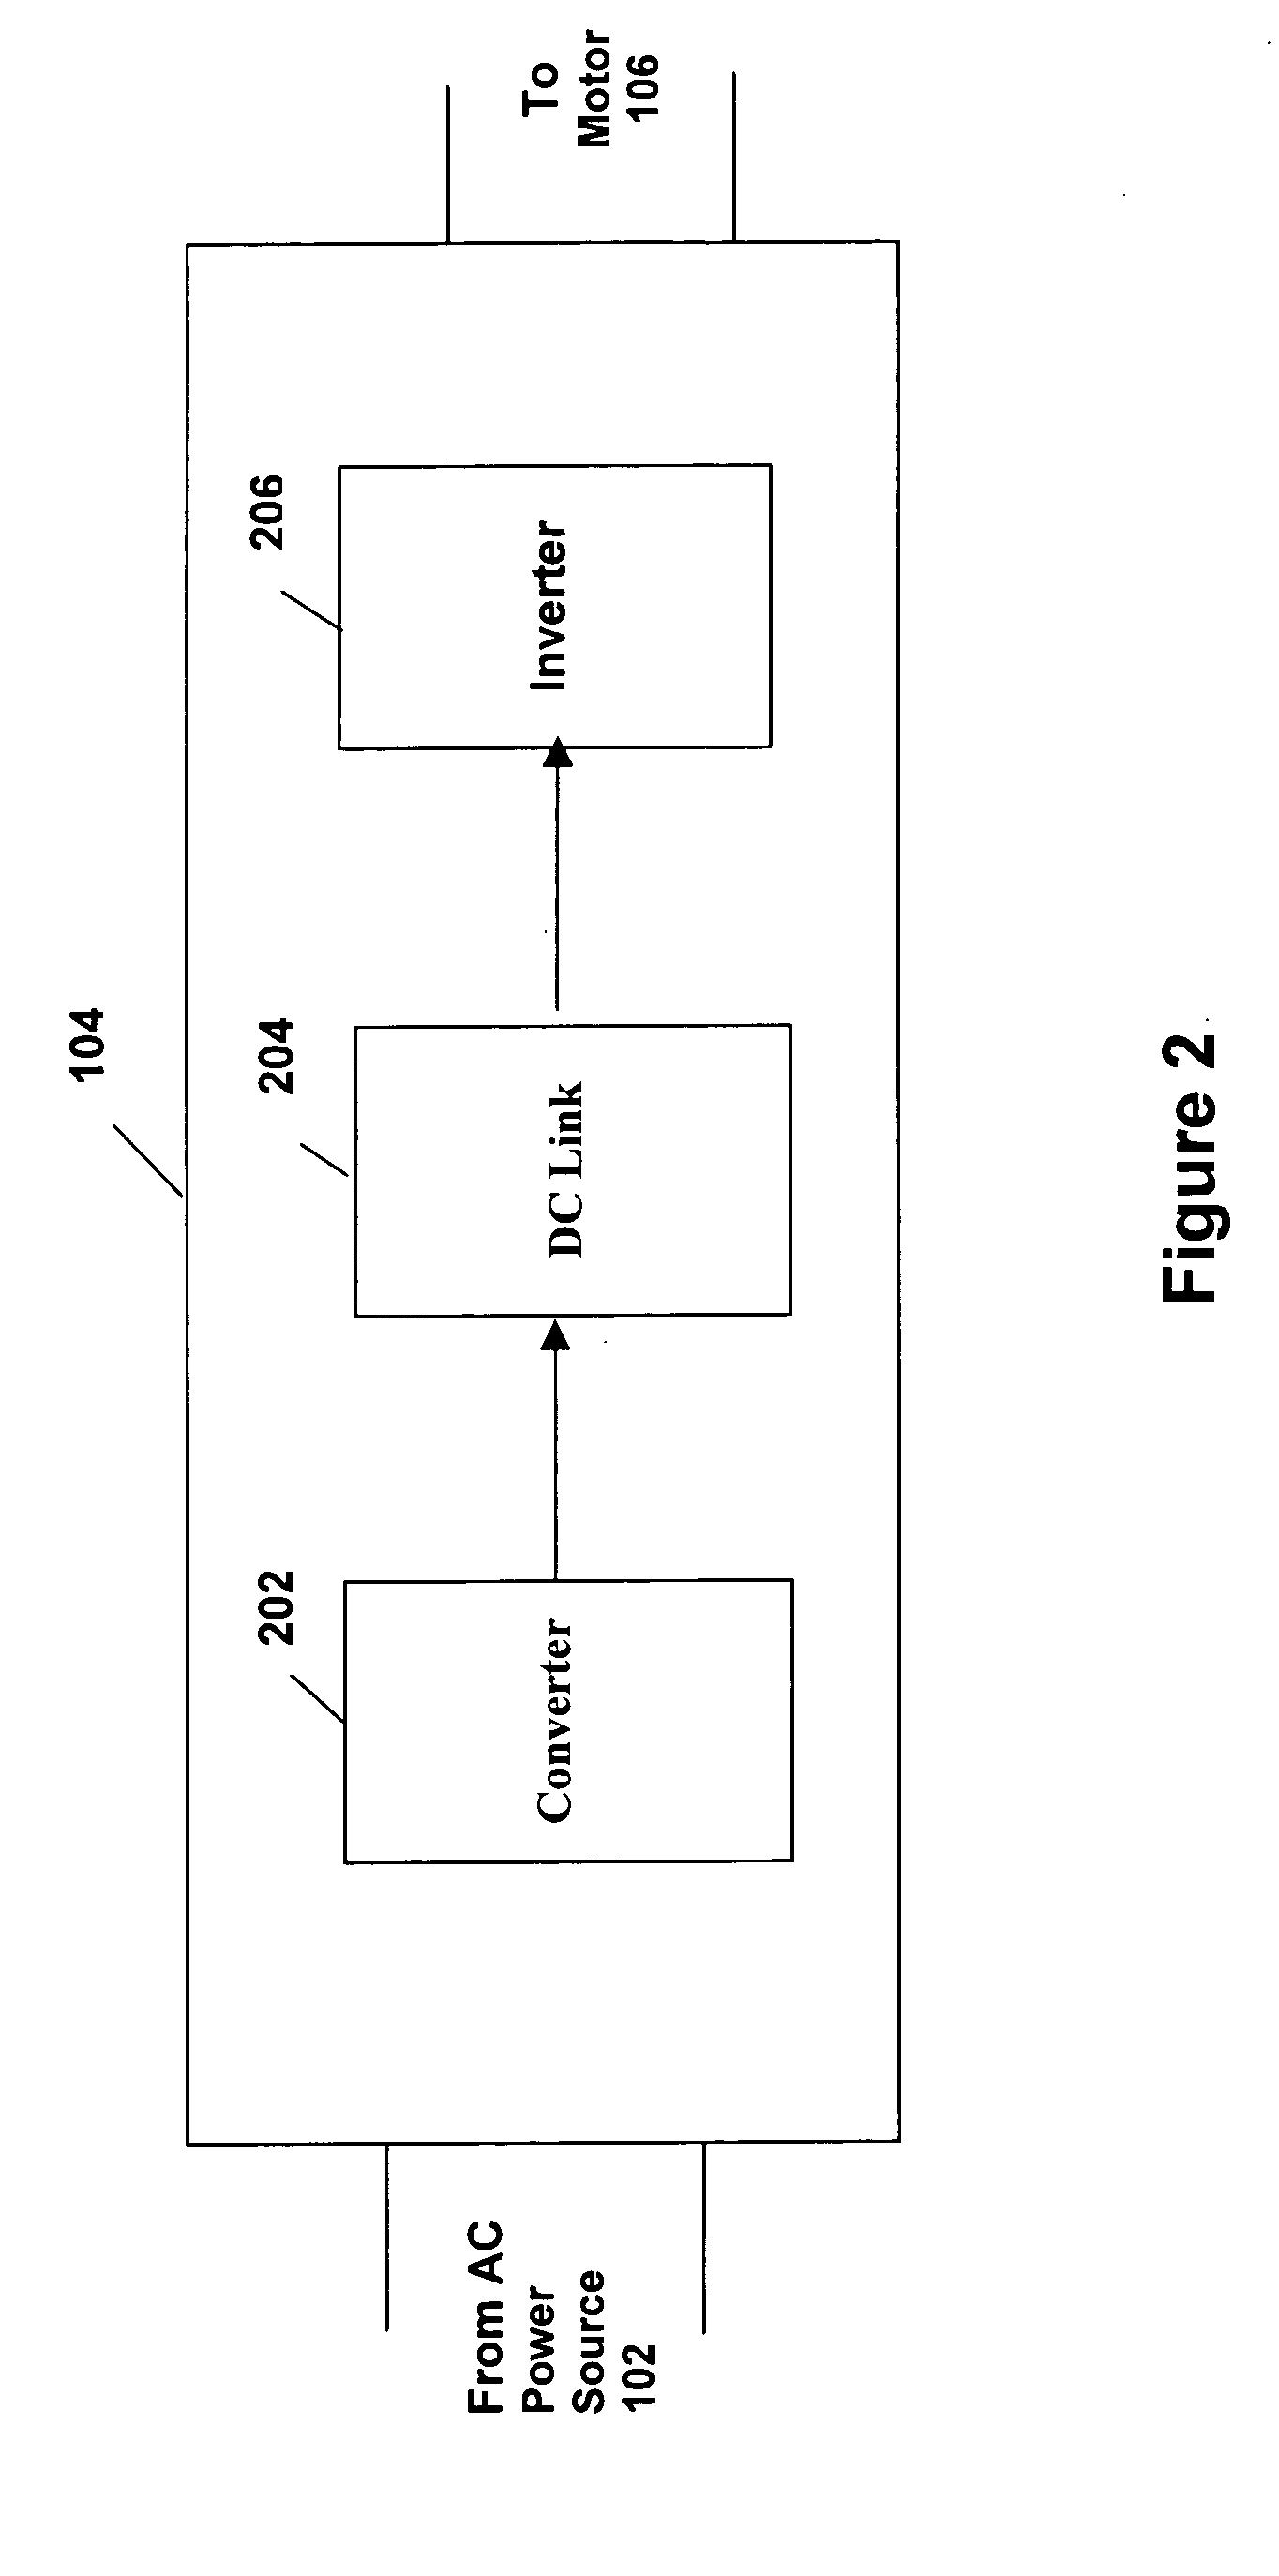 System and method for increasing output horsepower and efficiency in a motor